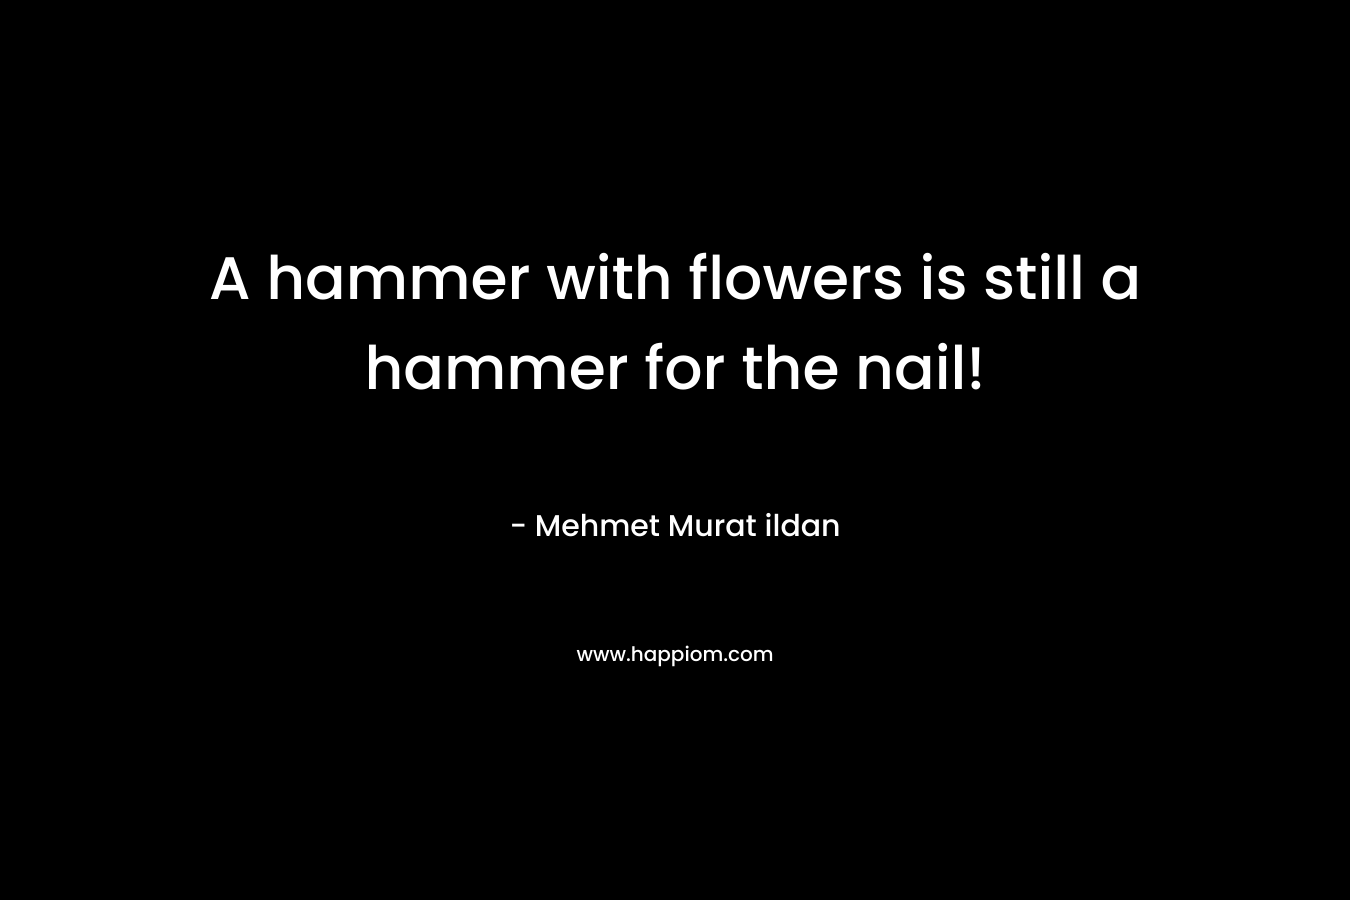 A hammer with flowers is still a hammer for the nail! – Mehmet Murat ildan